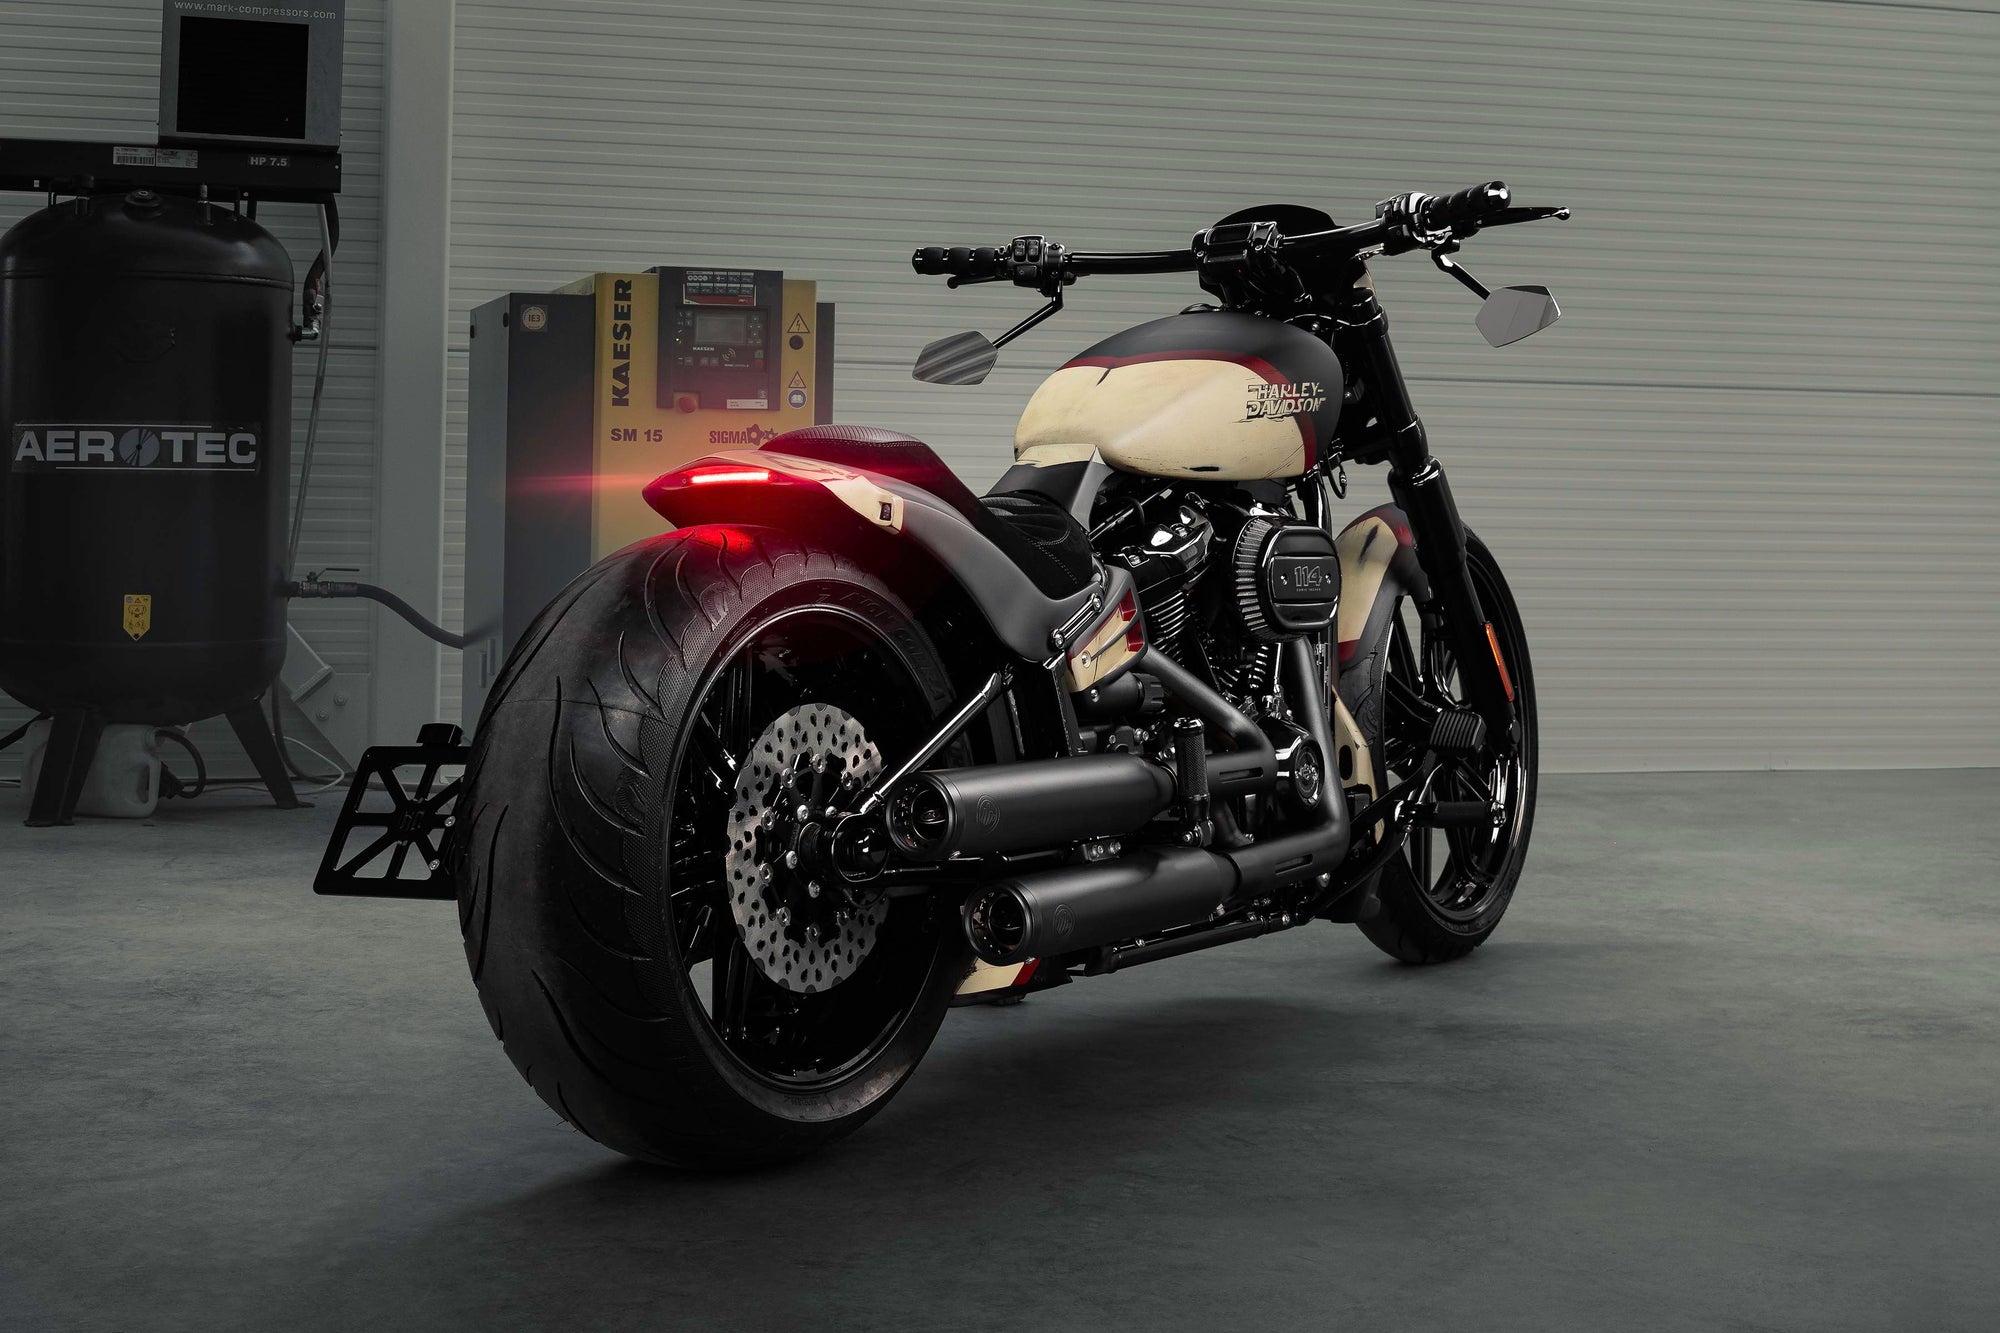 Harley Davidson motorcycle with Killer Custom parts from the rear in a modern bike shop